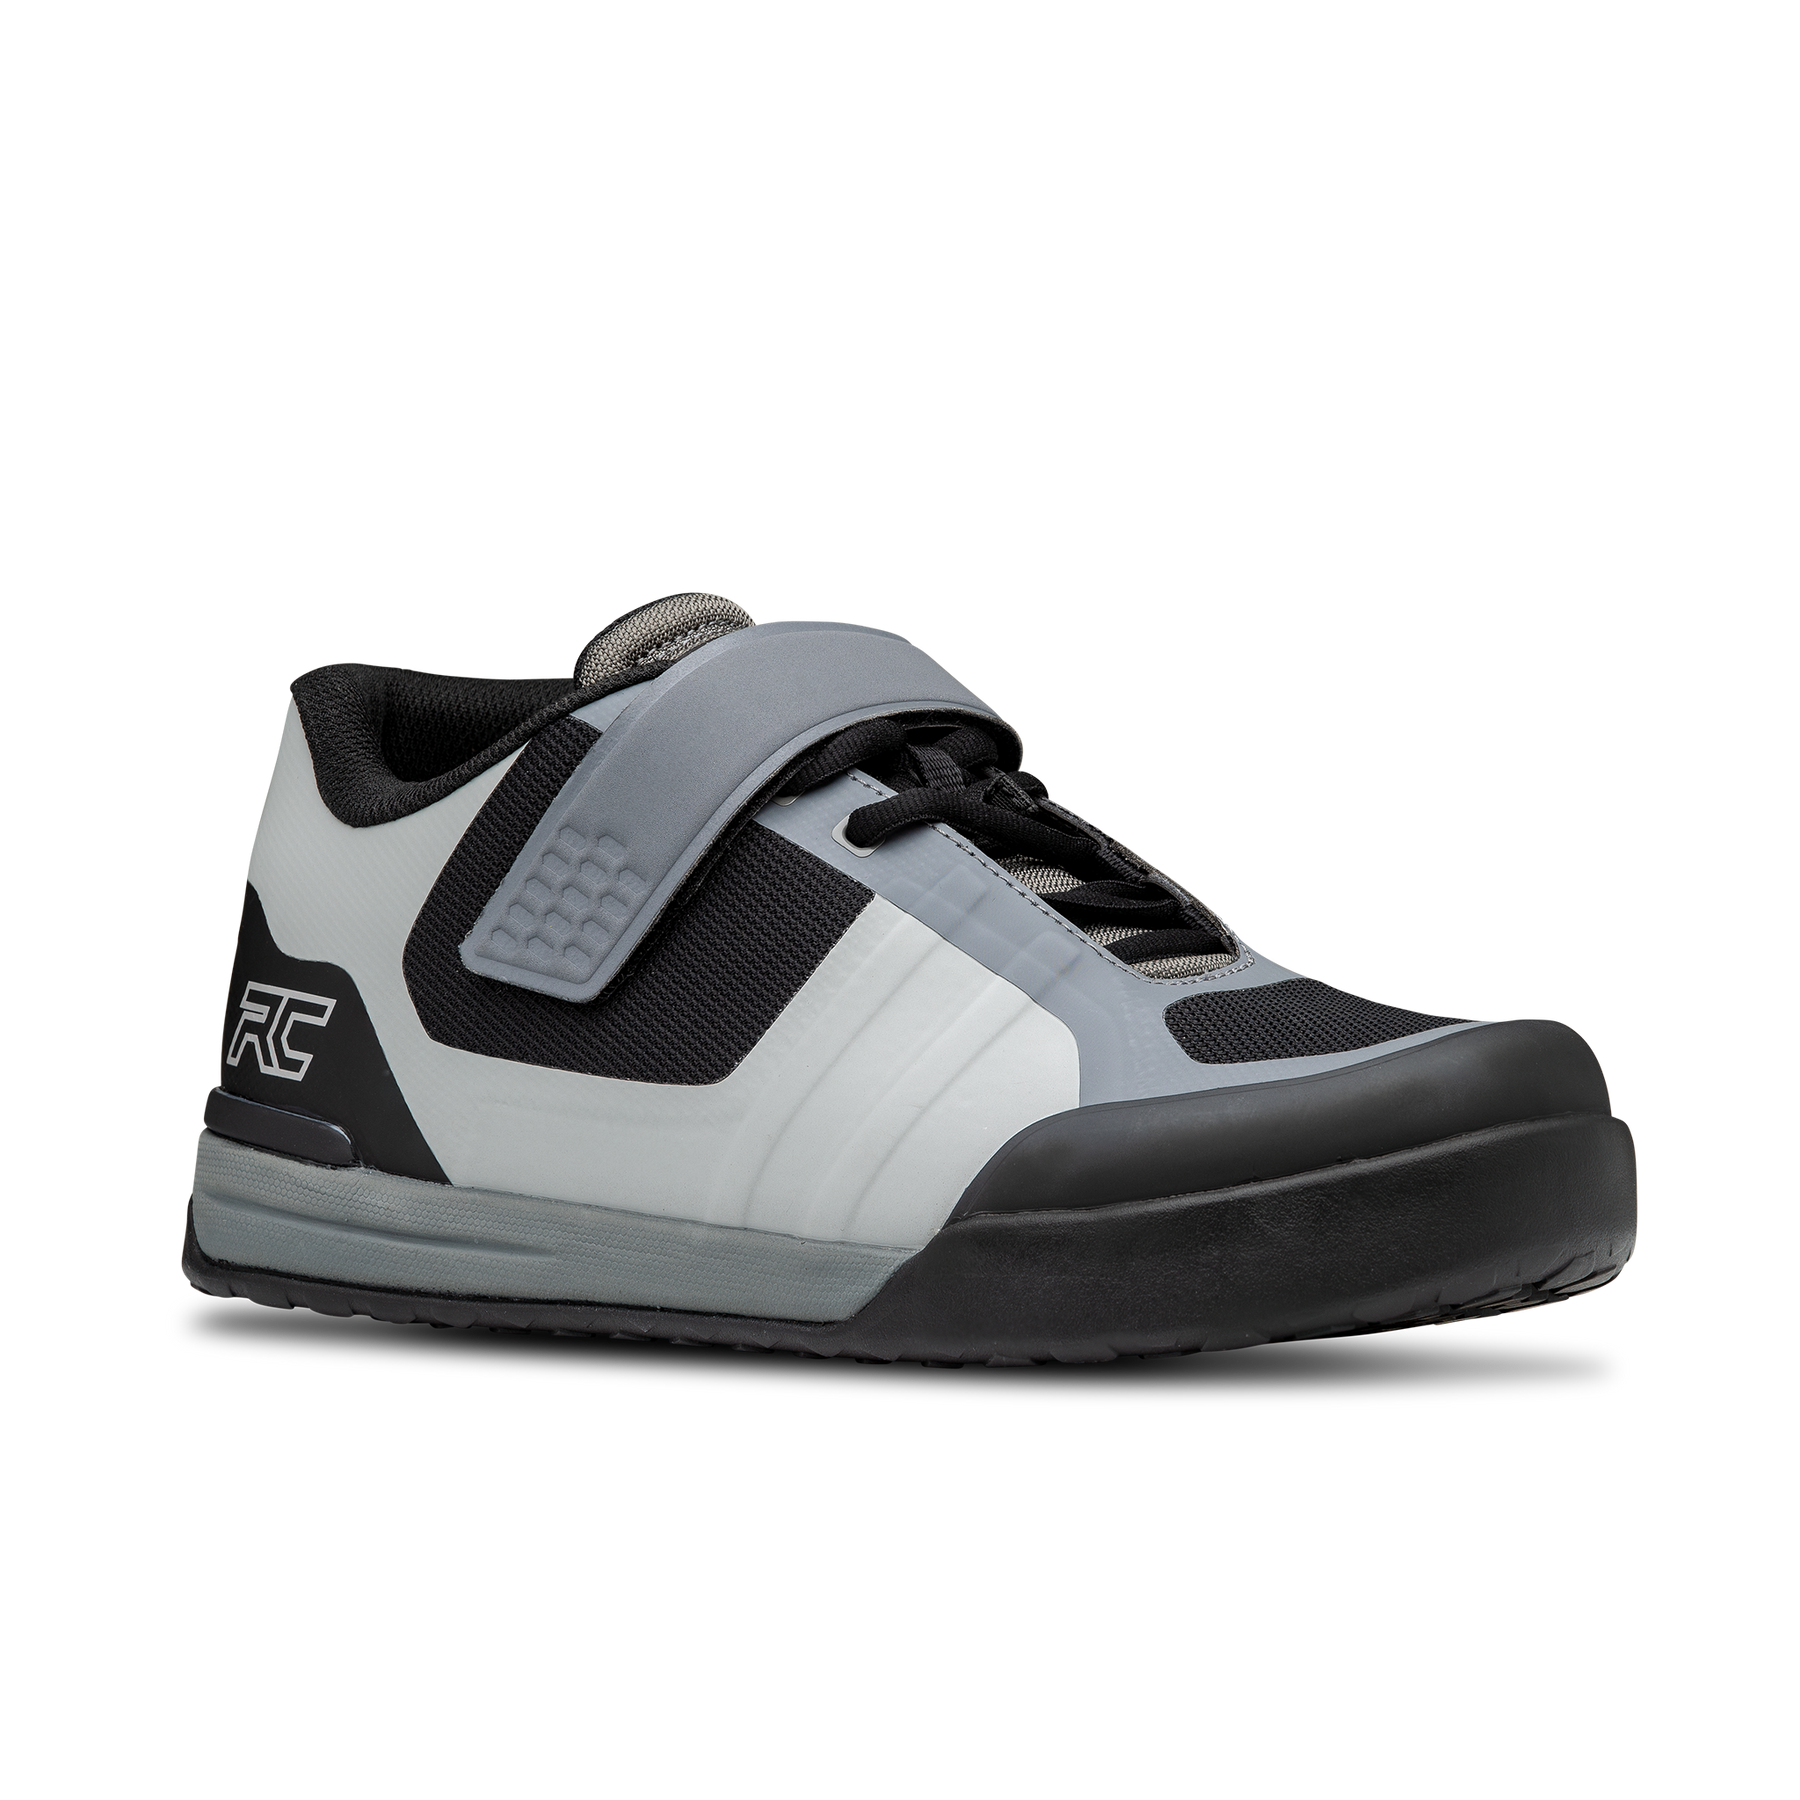 Ride Concepts Transition Spd Shoes - US 12.5 - Charcoal - Grey - Image 1